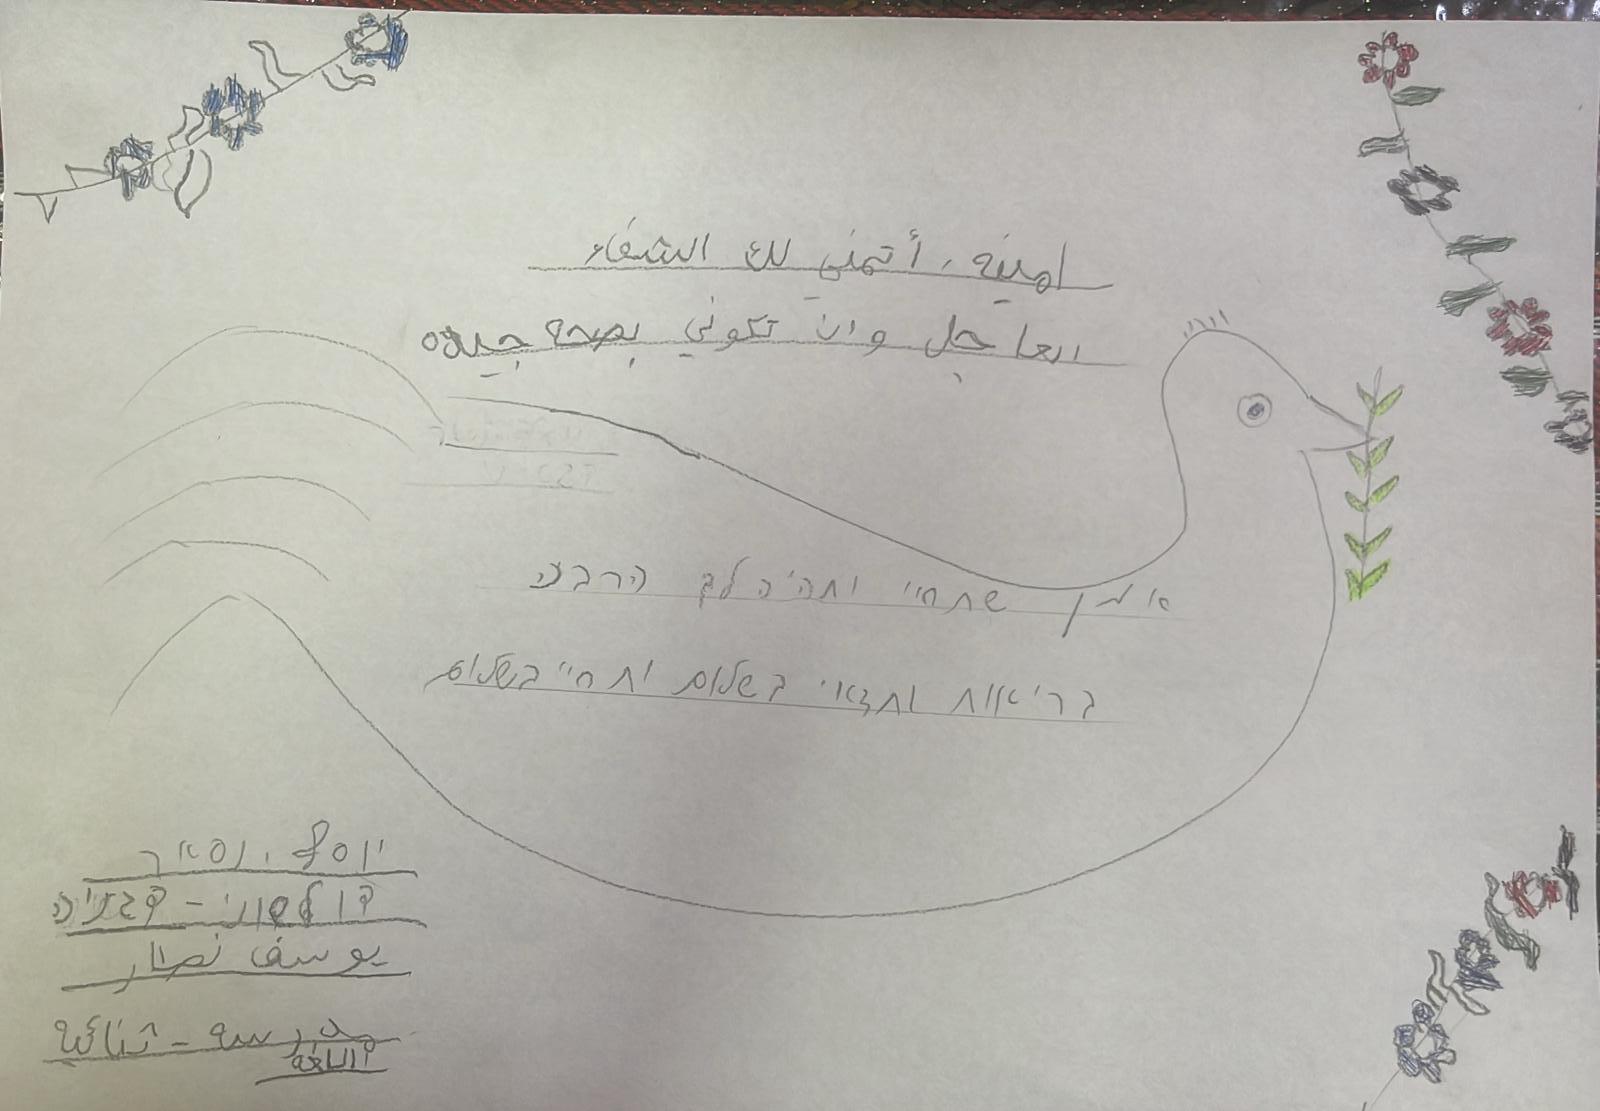 Another drawing gifted to Amina al-Hassouni, written in Hebrew and Arabic (Photo: Private album)